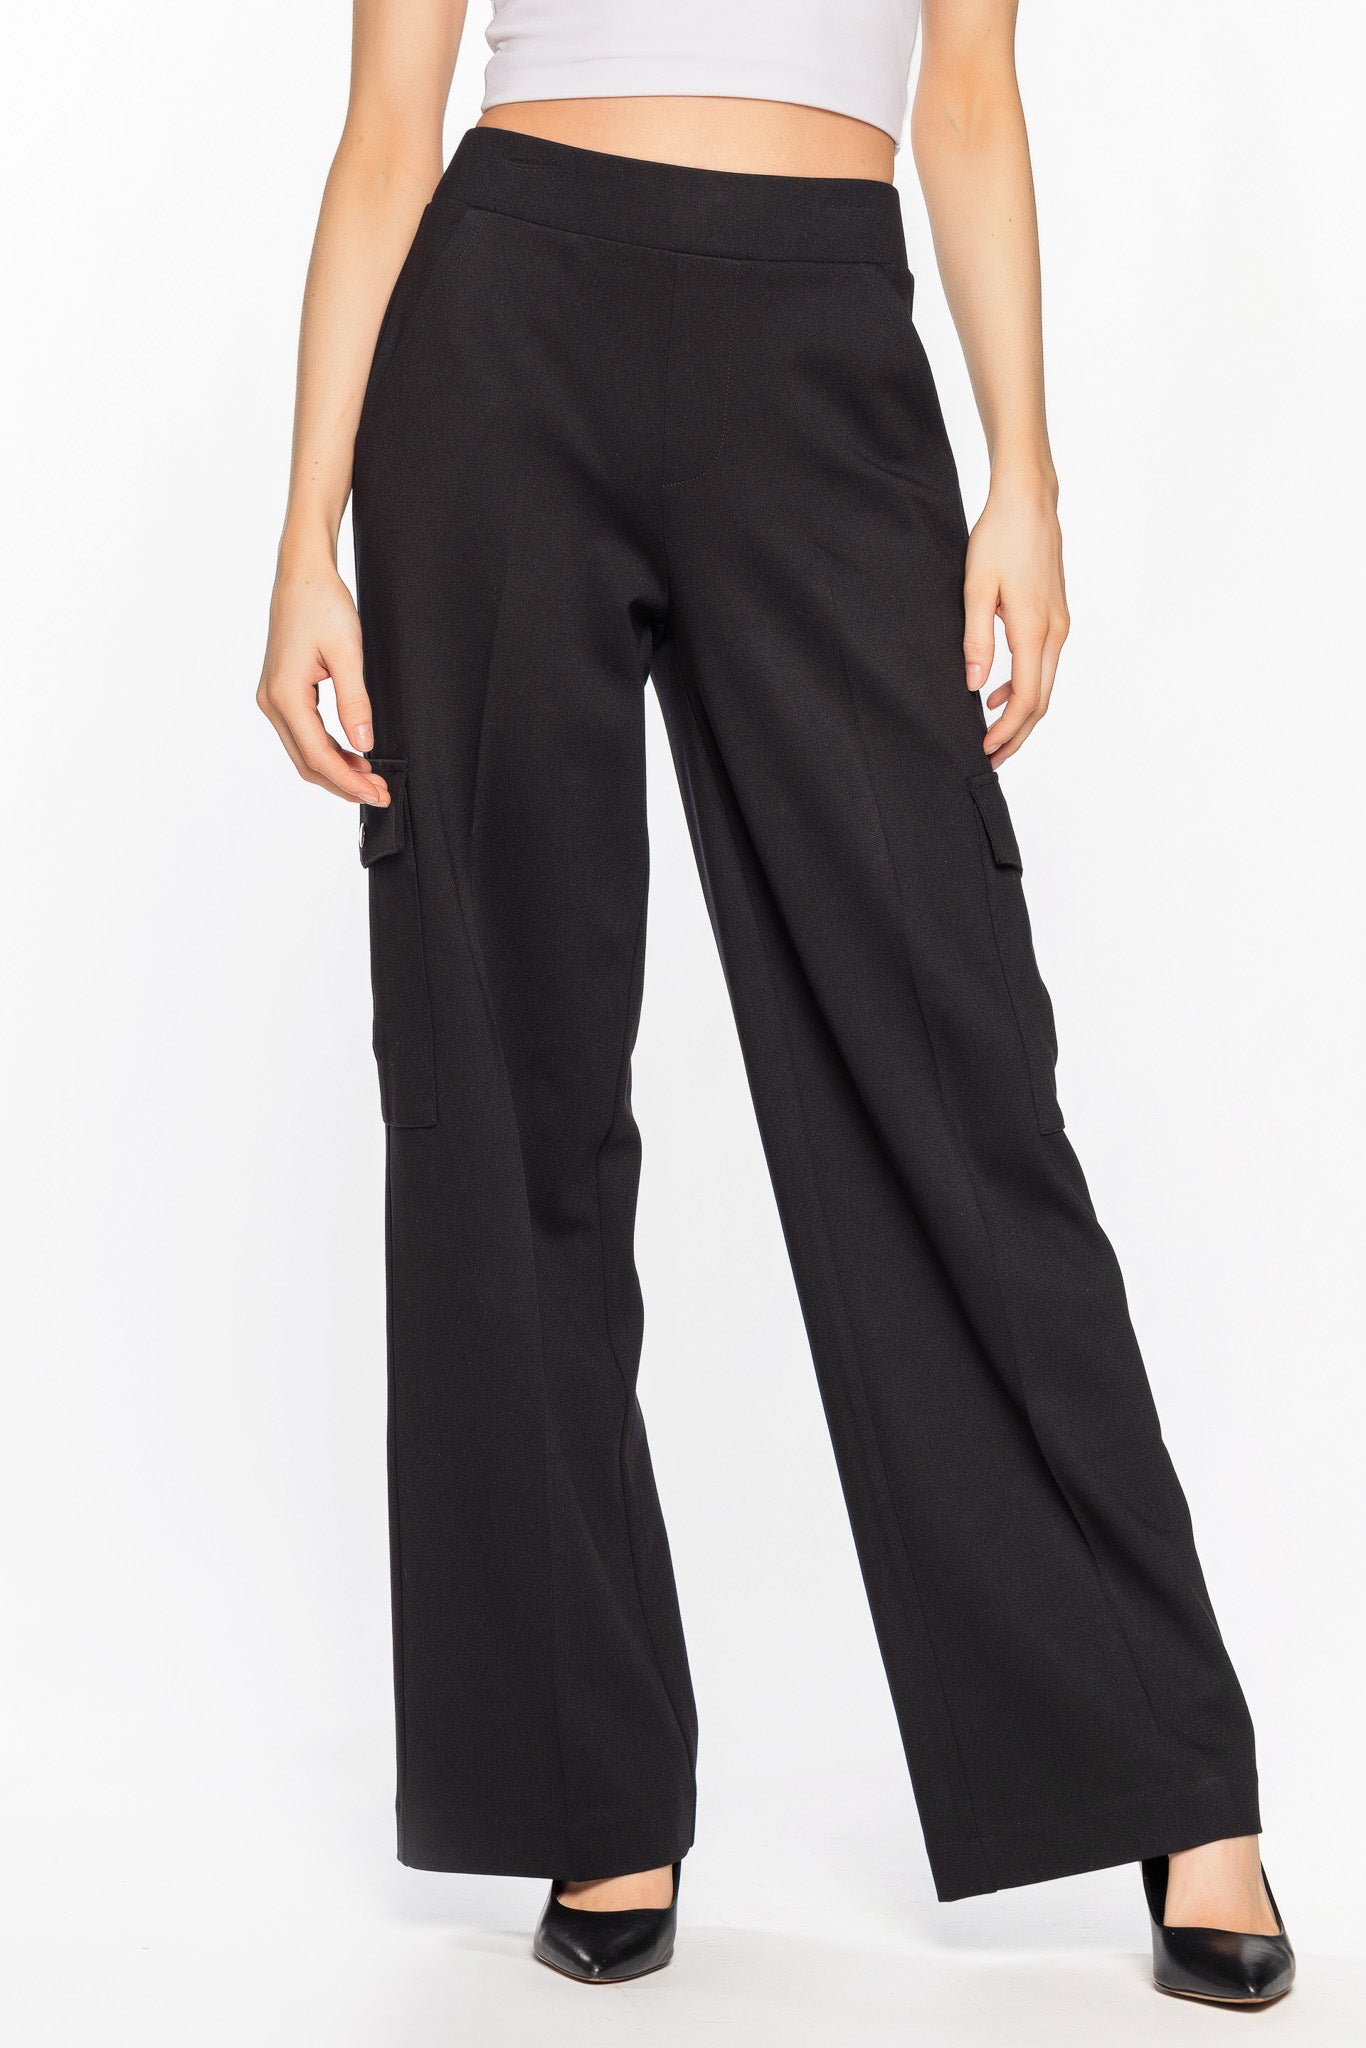 Women's High-Waisted Pants: 77 Items up to −90%